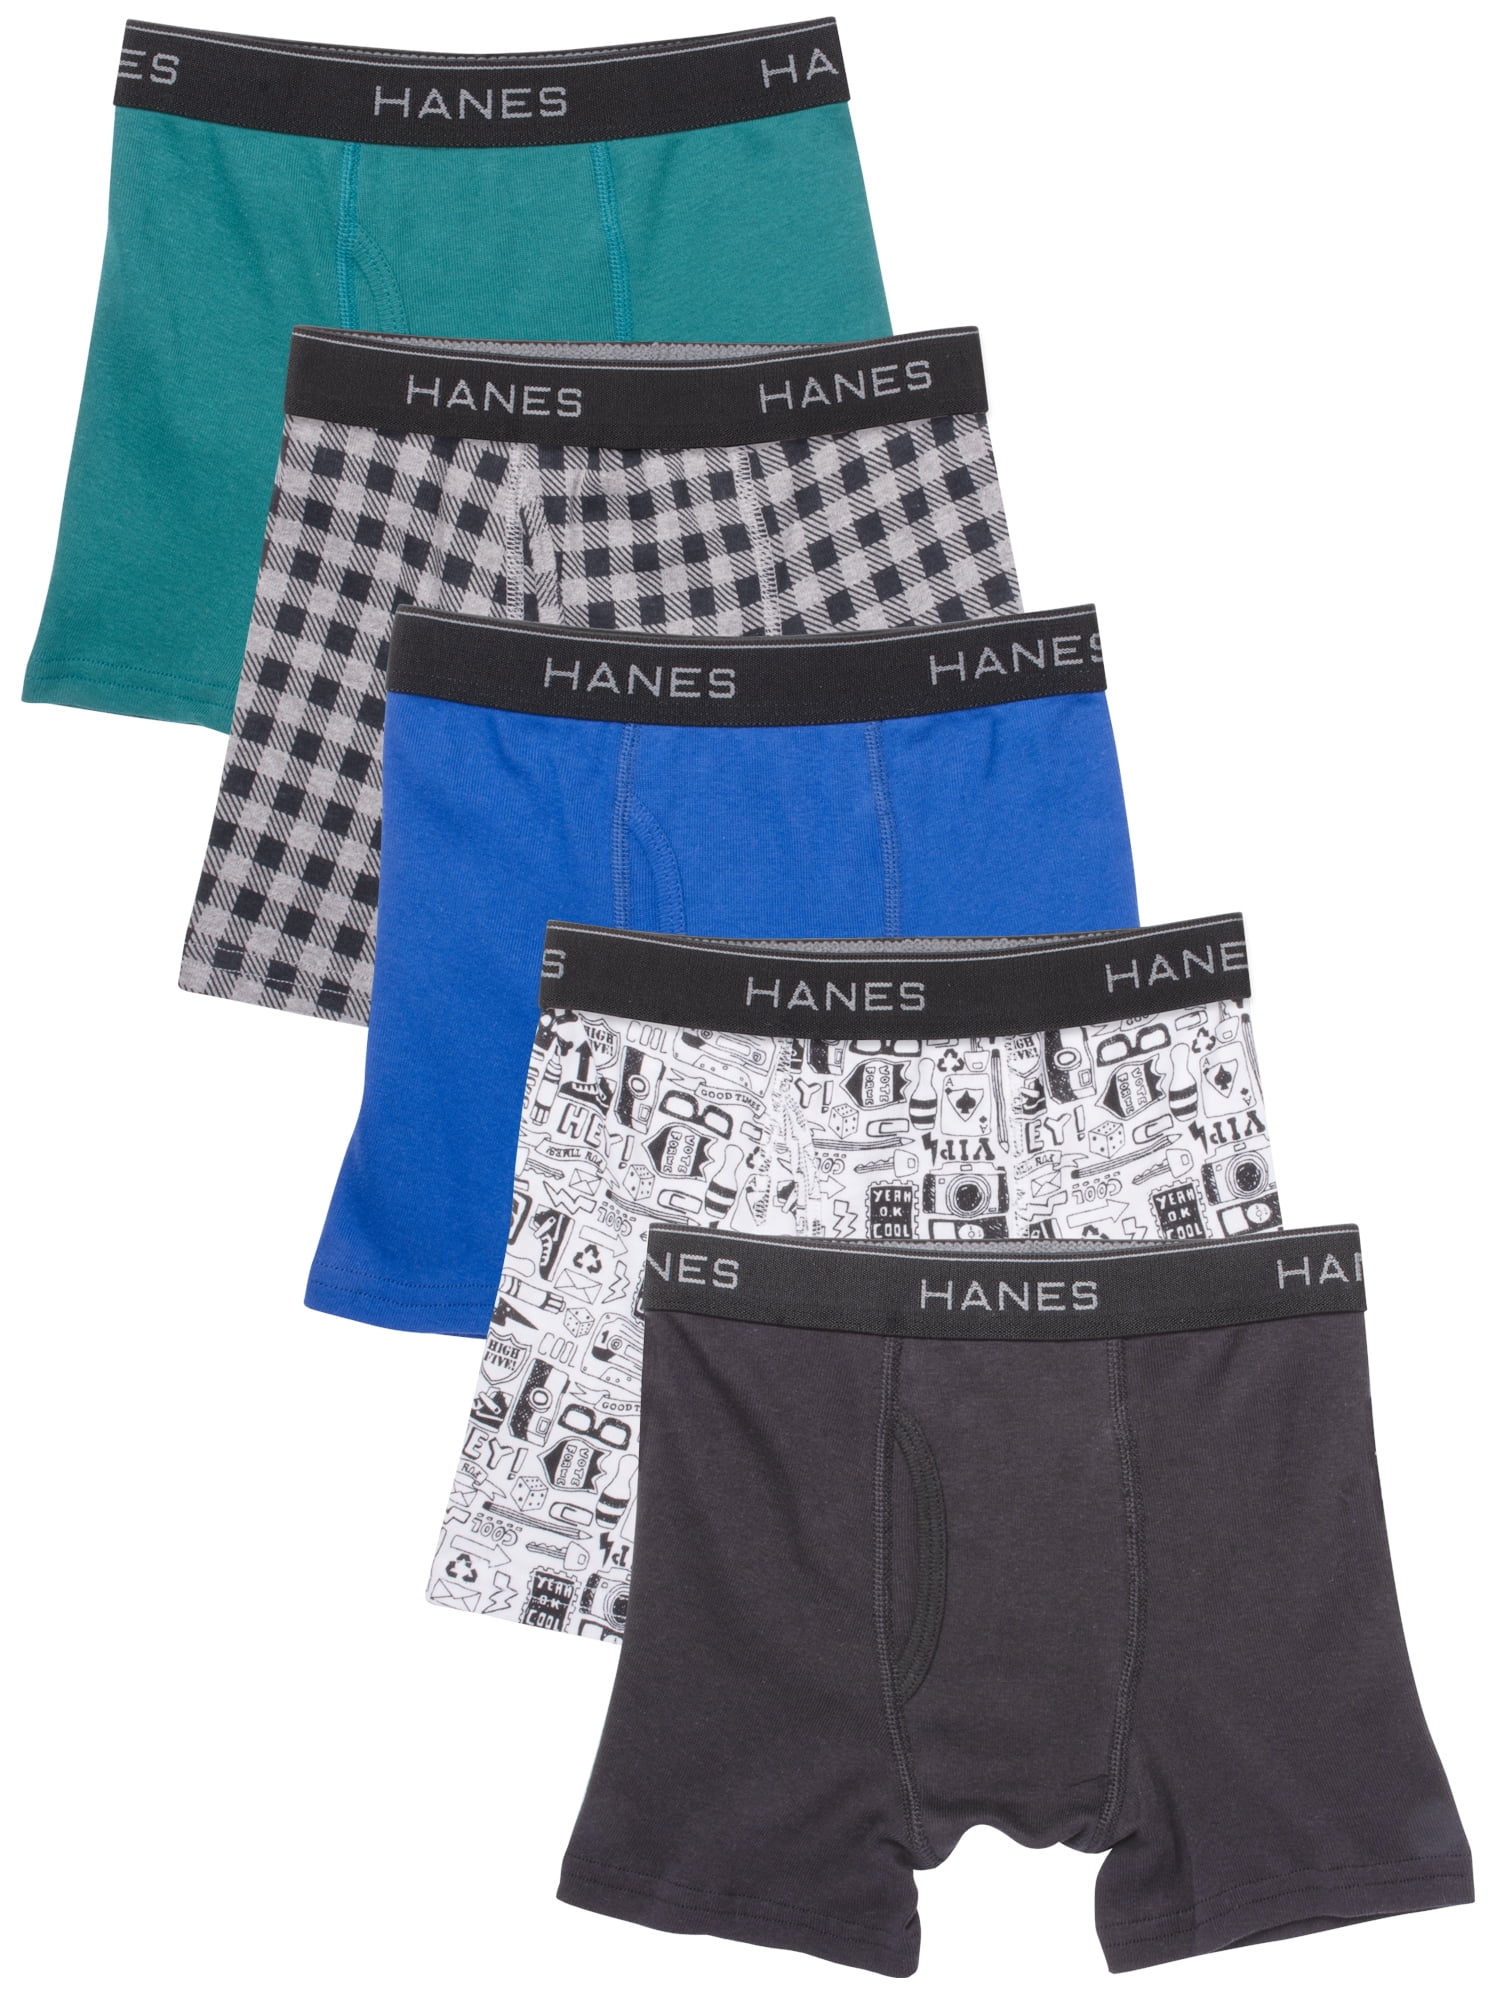 Comfortable Cotton Boxer Hanes Boyfriend Boxer Briefs For Boys Ideal For  Small And Mid Childrens Underwear X0829 From Fashion_official01, $7.21